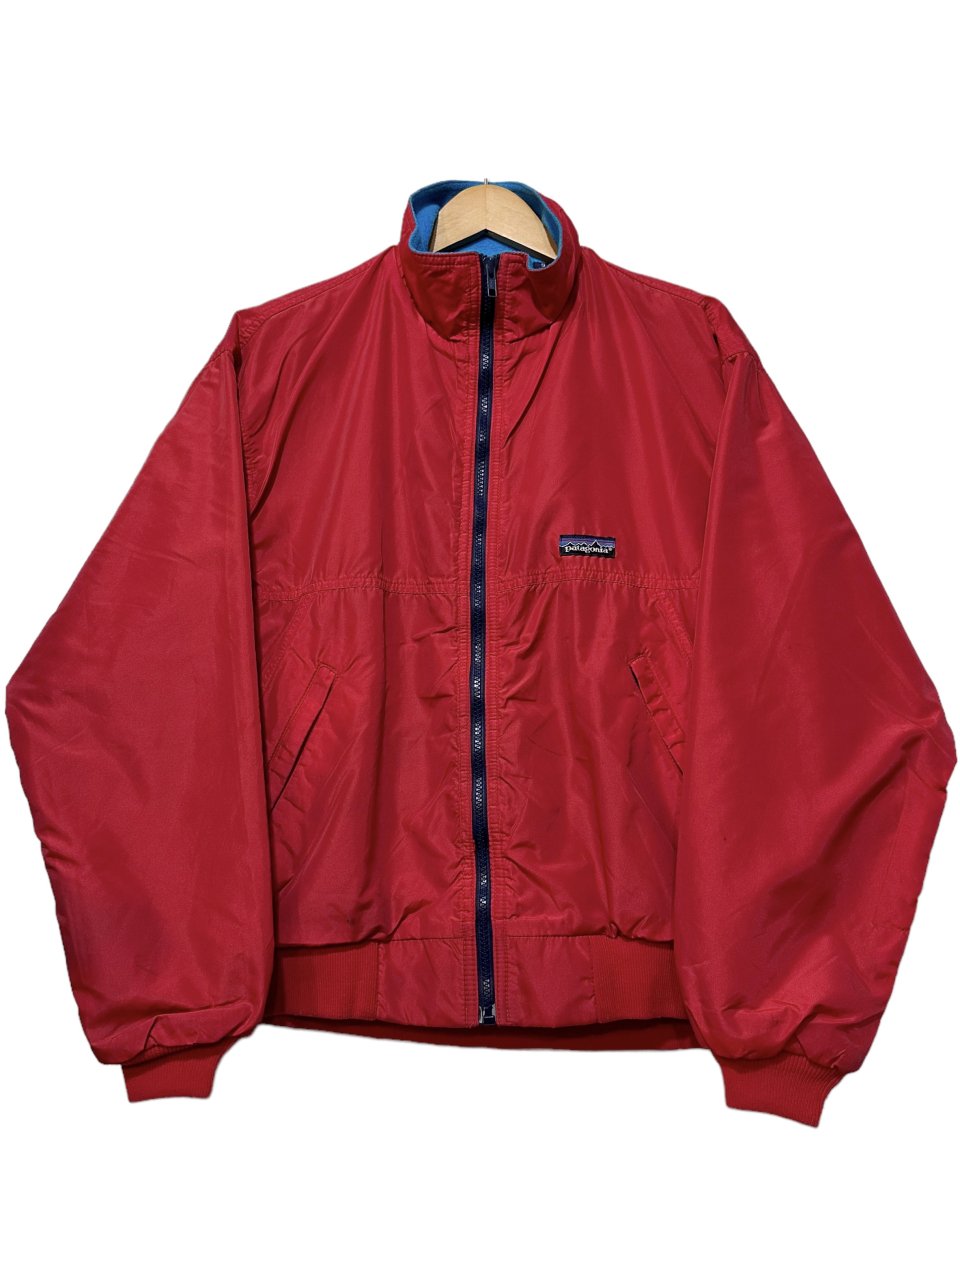 USA製 88年 patagonia Shelled Capilene Jacket (French Red×Peacock